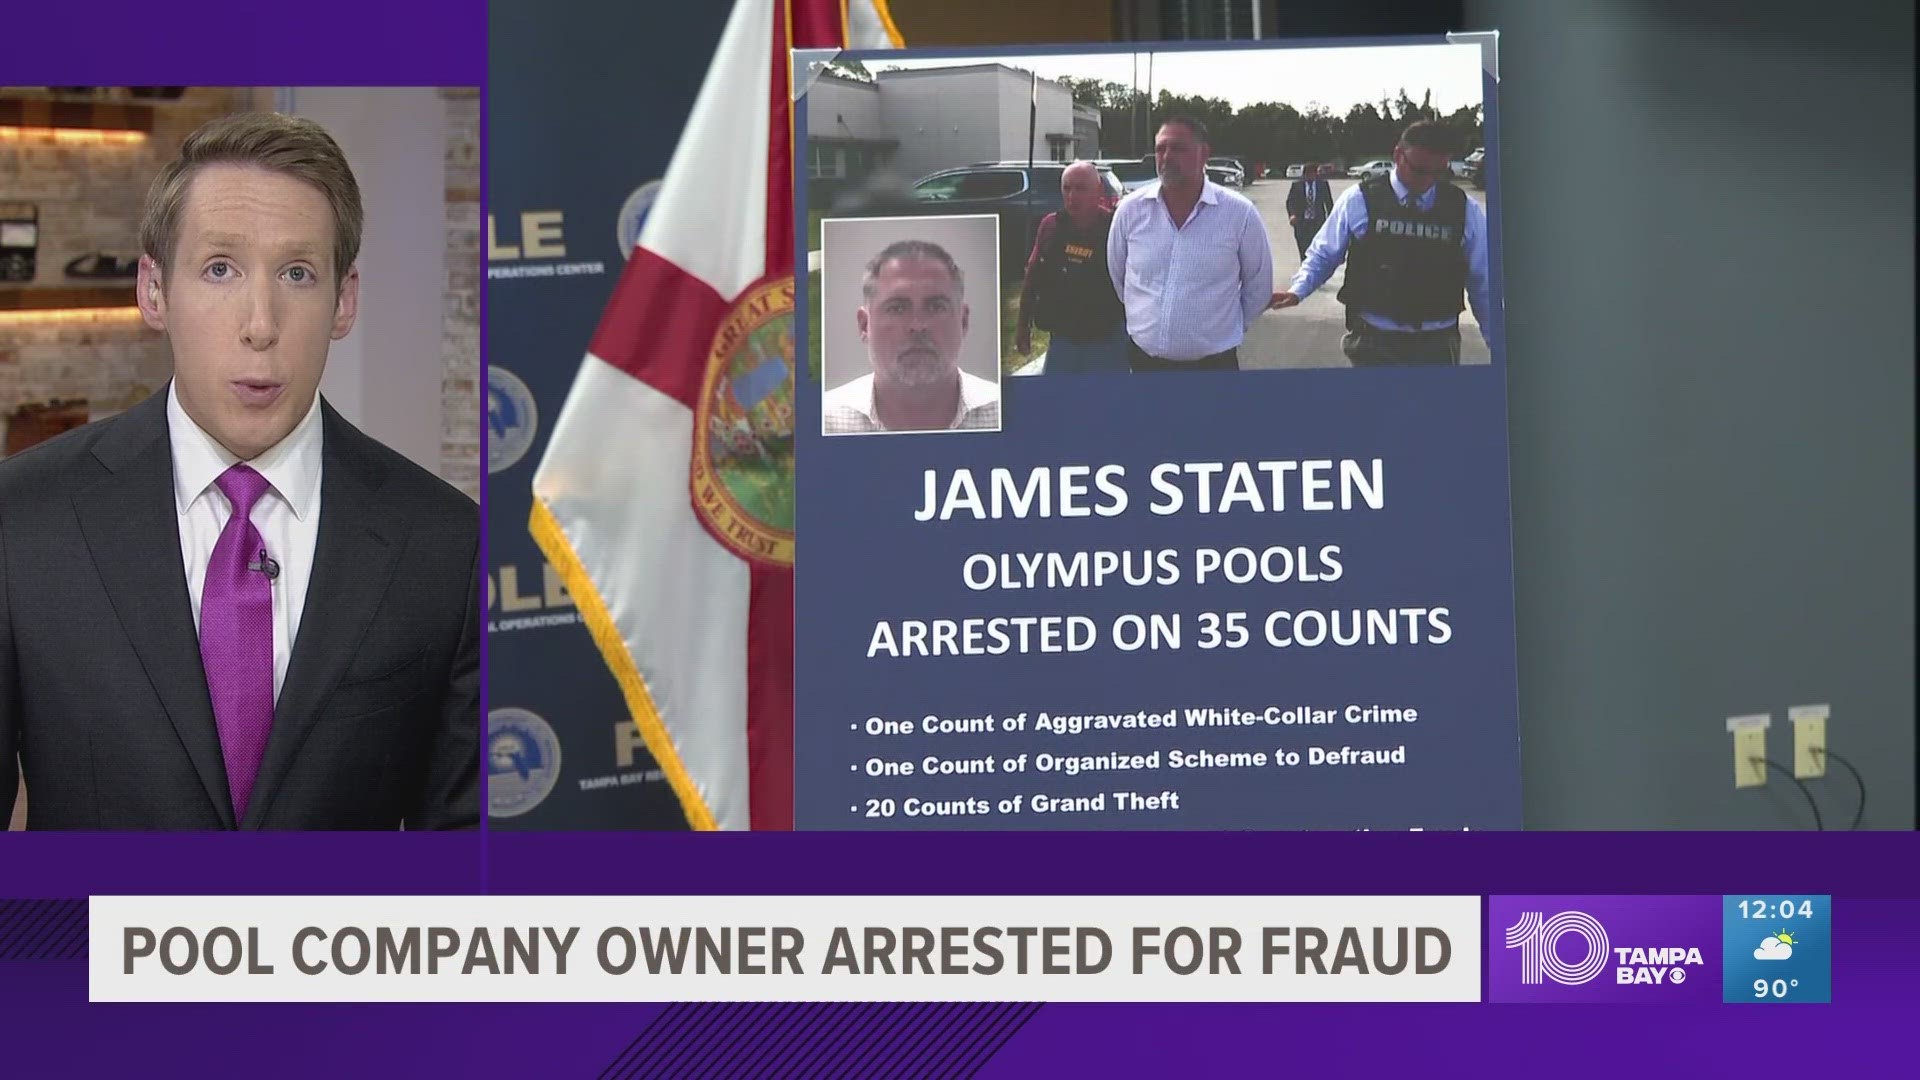 Among James Staten's 'lavish' purchases were $53,000 Super Bowl LV tickets, FDLE said.